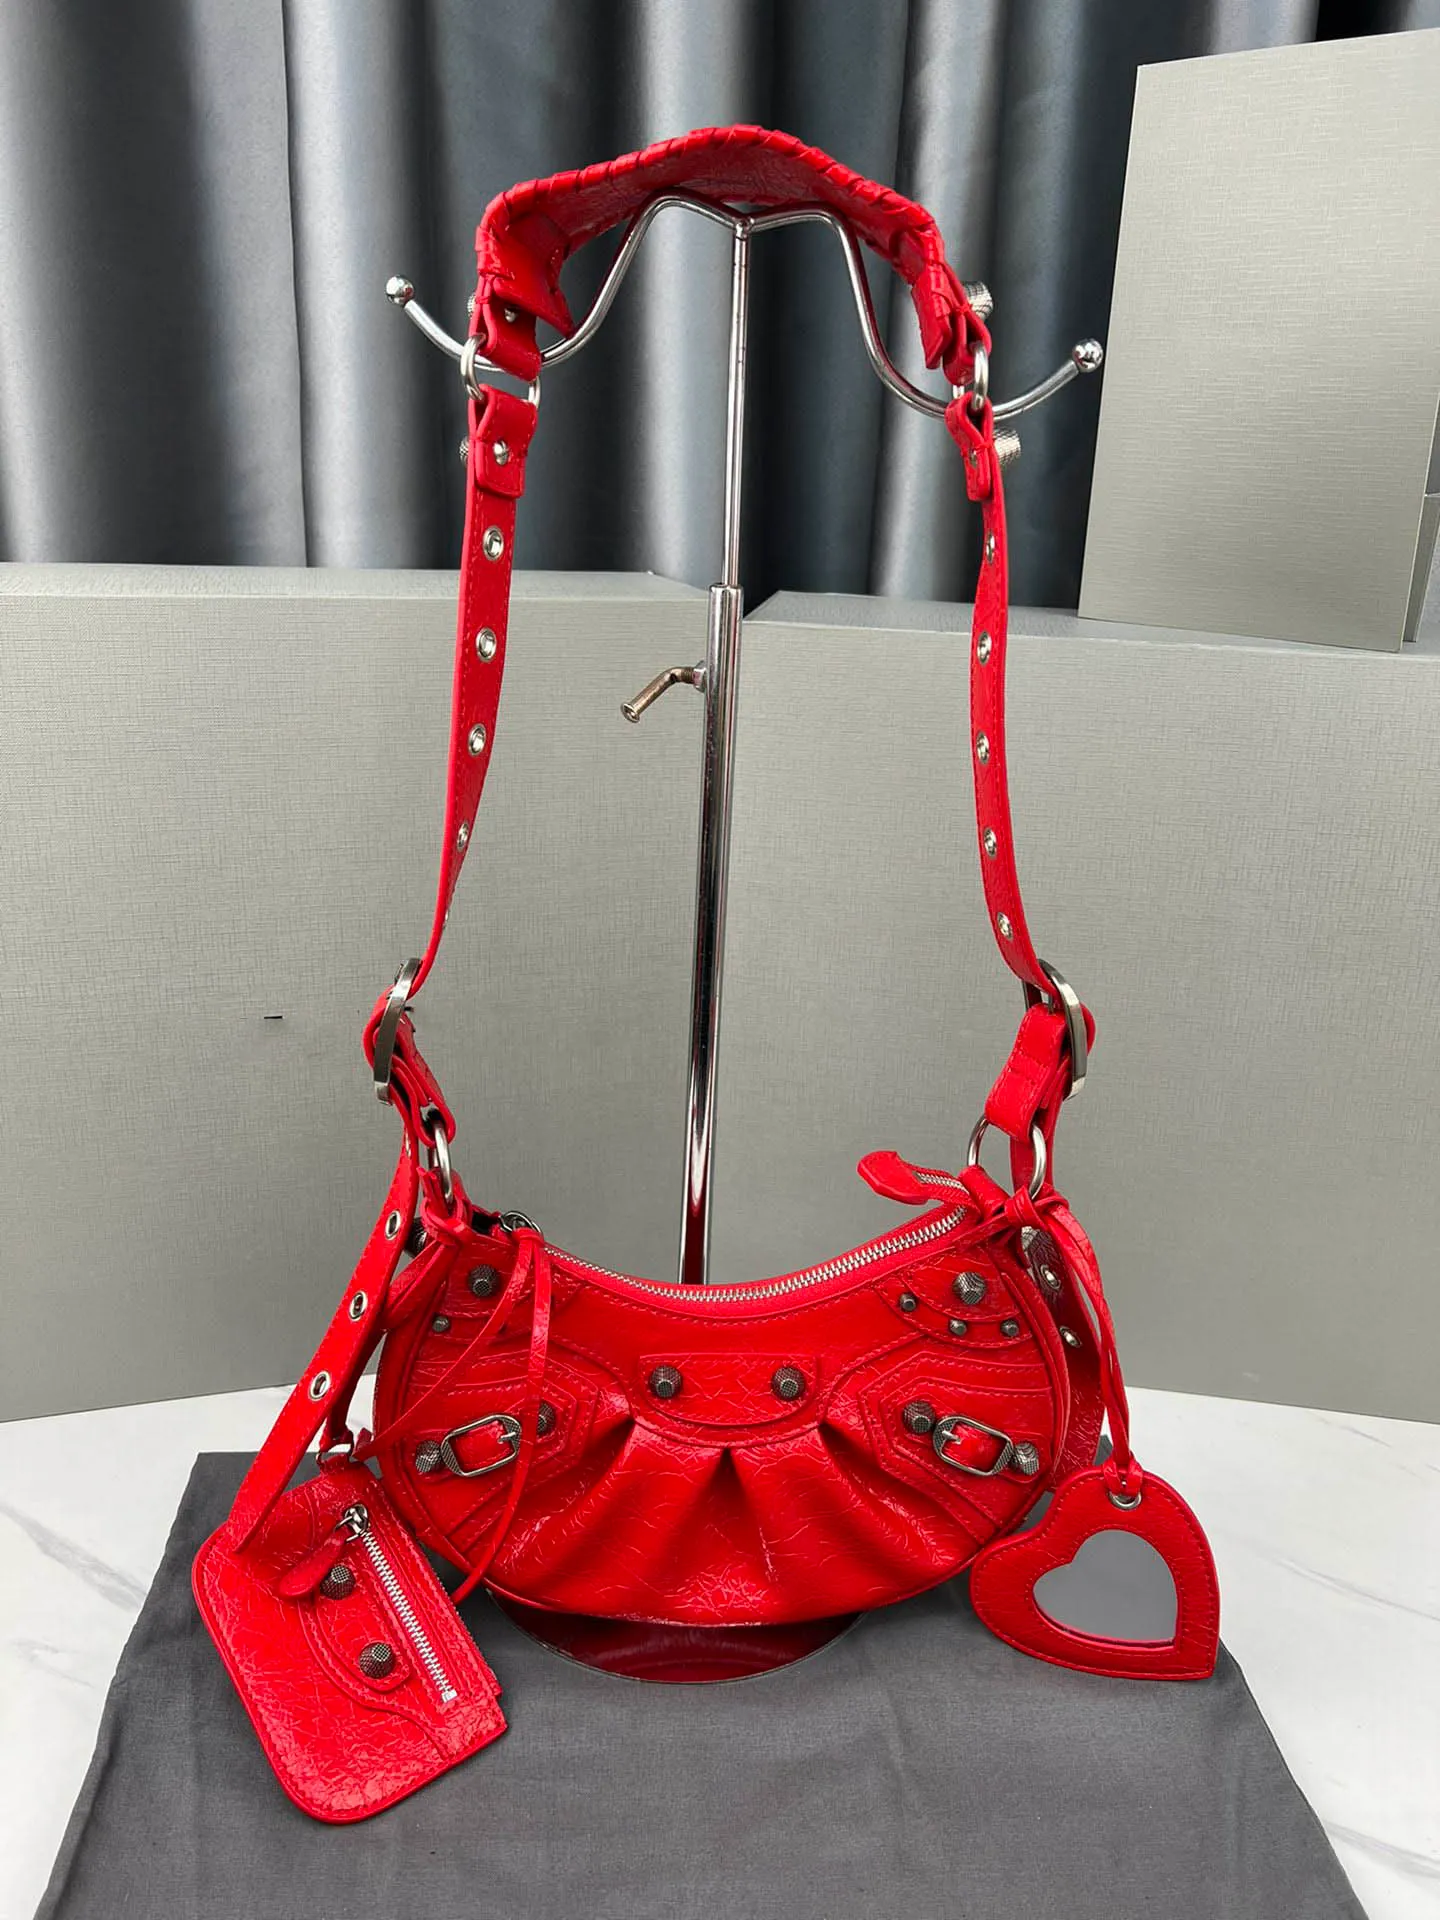 Designer Genuine Leather Le Cagole Le Cagole Bag For Women Luxury Fashion  Crossbody In Pink, Crocodile Pattern, Available In Black, Silver, And Red  YI550 From Qinwa988, $34.7